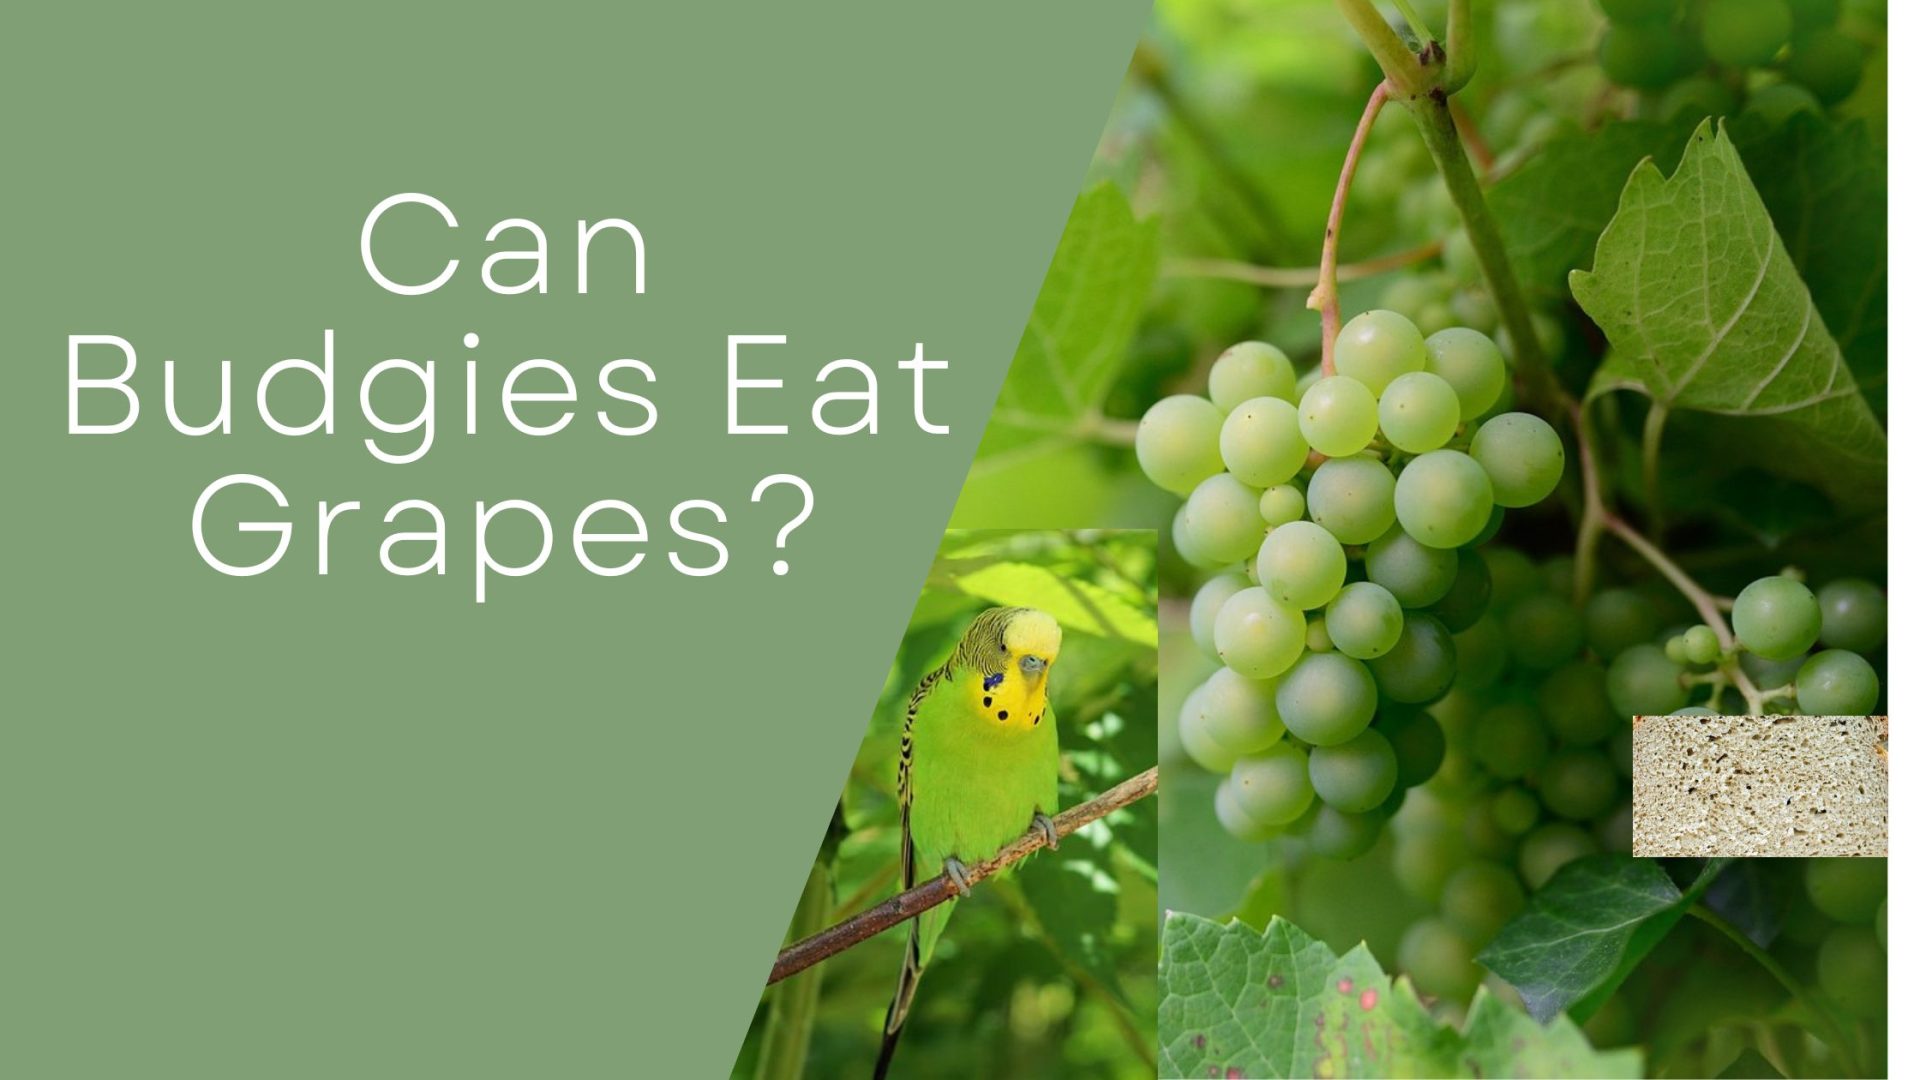 Can Budgies Eat Grapes